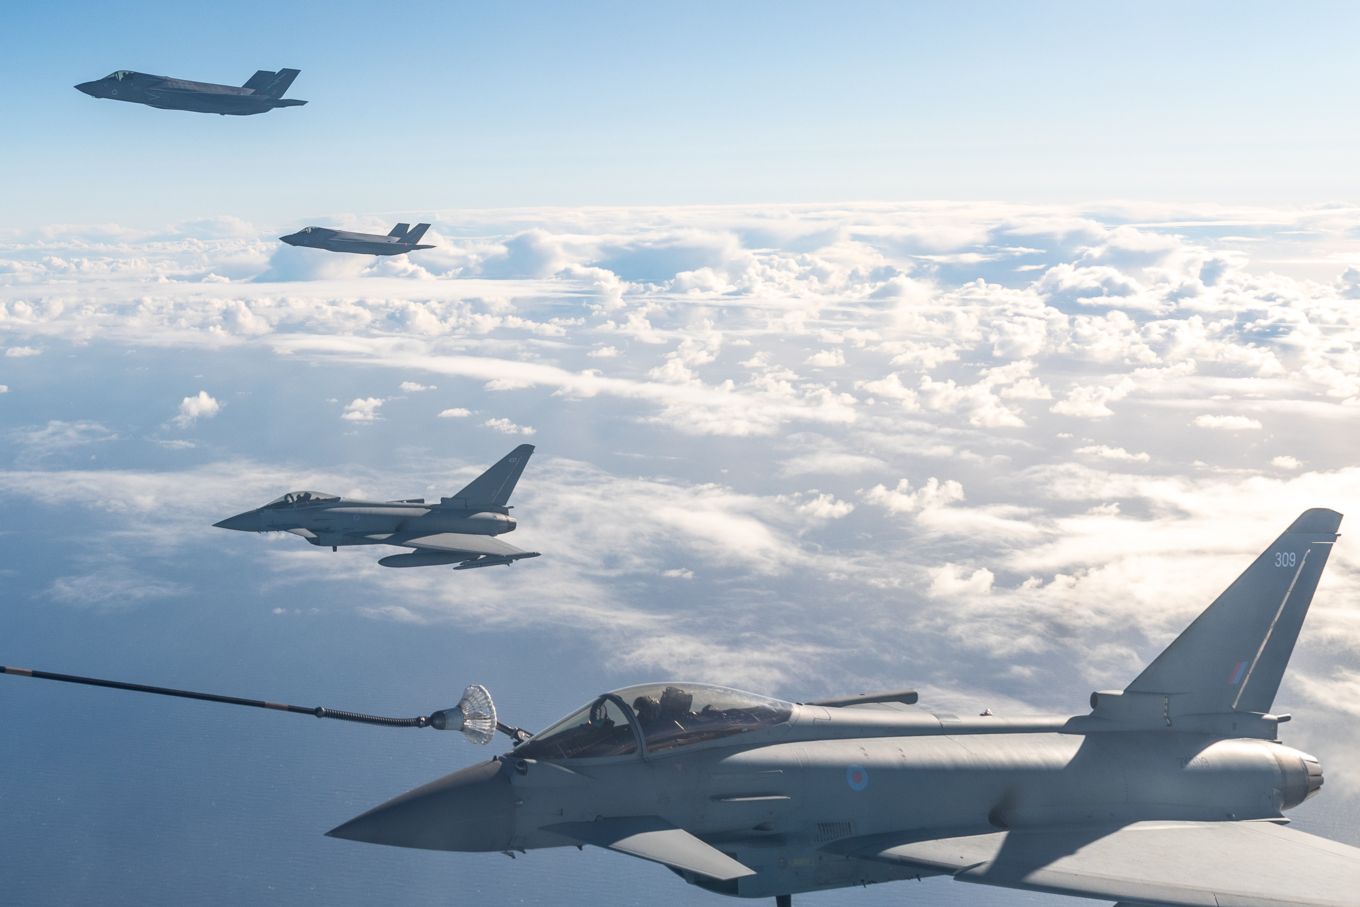 Image shows RAF Typhoons and F-35 Lightning aircraft during air-to-air refuelling.